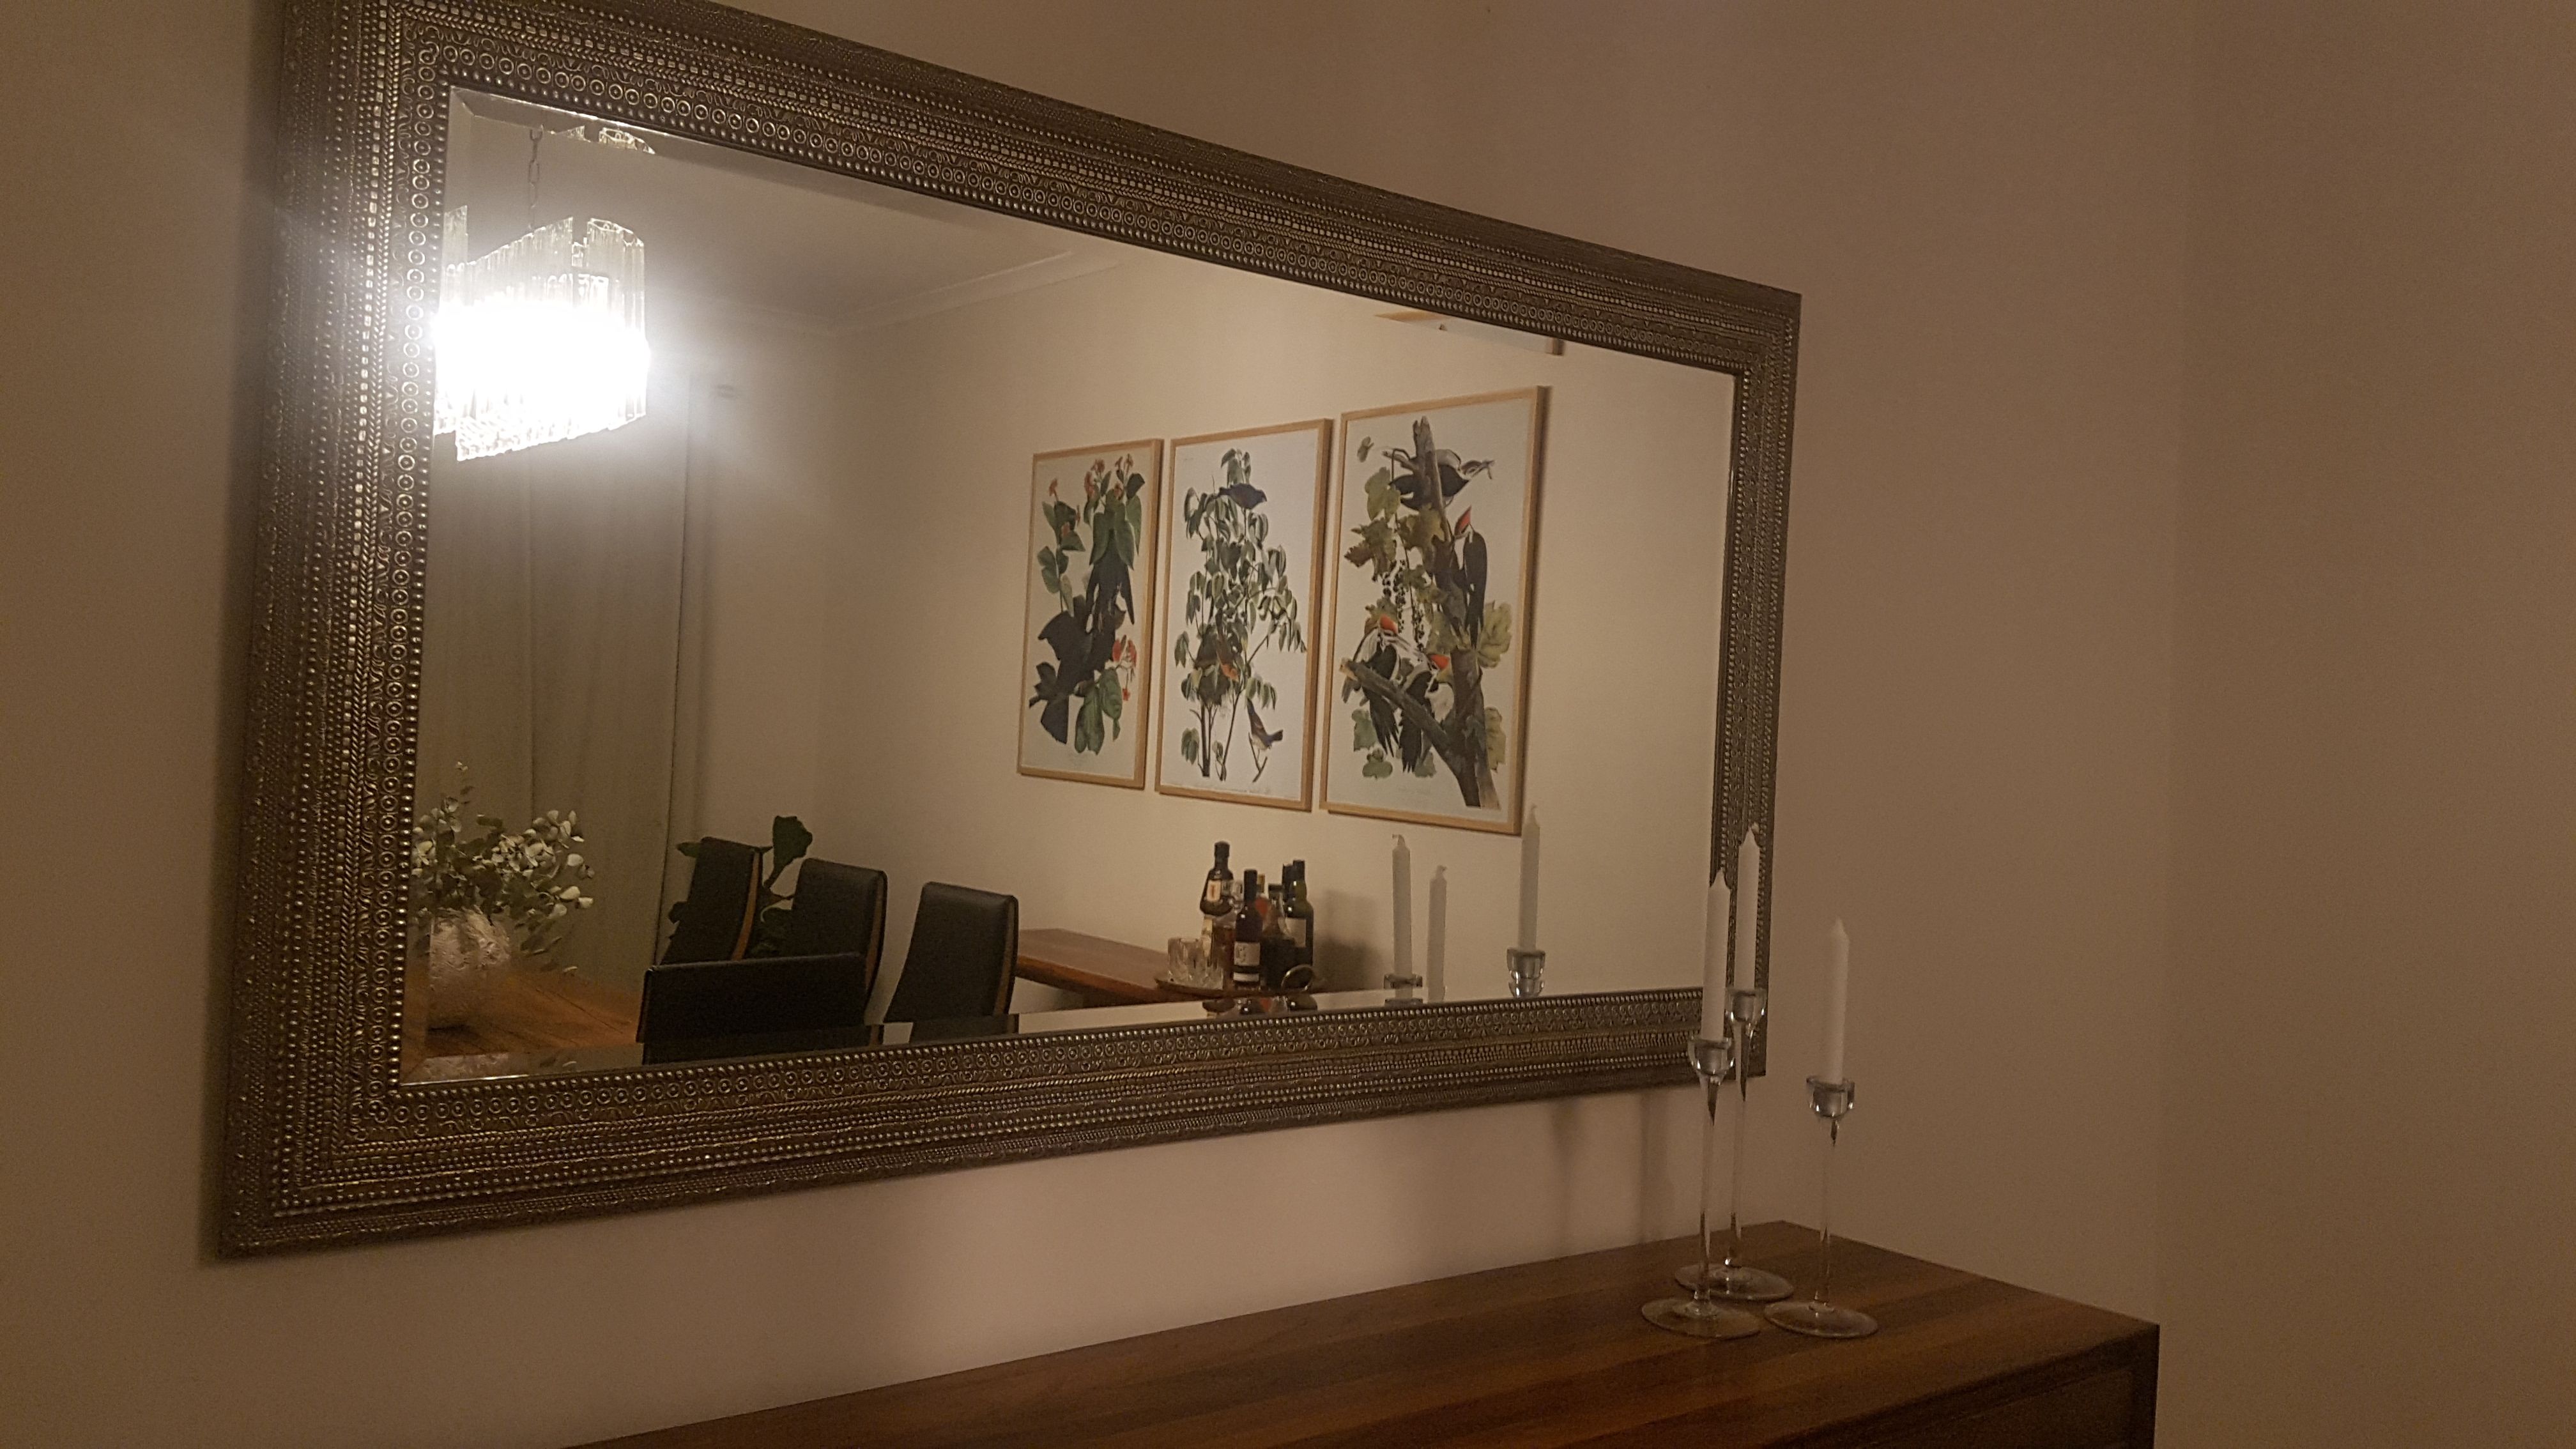 How To Hang A 31kg Mirror On Wall, How To Fit A Heavy Mirror On Plasterboard Wall